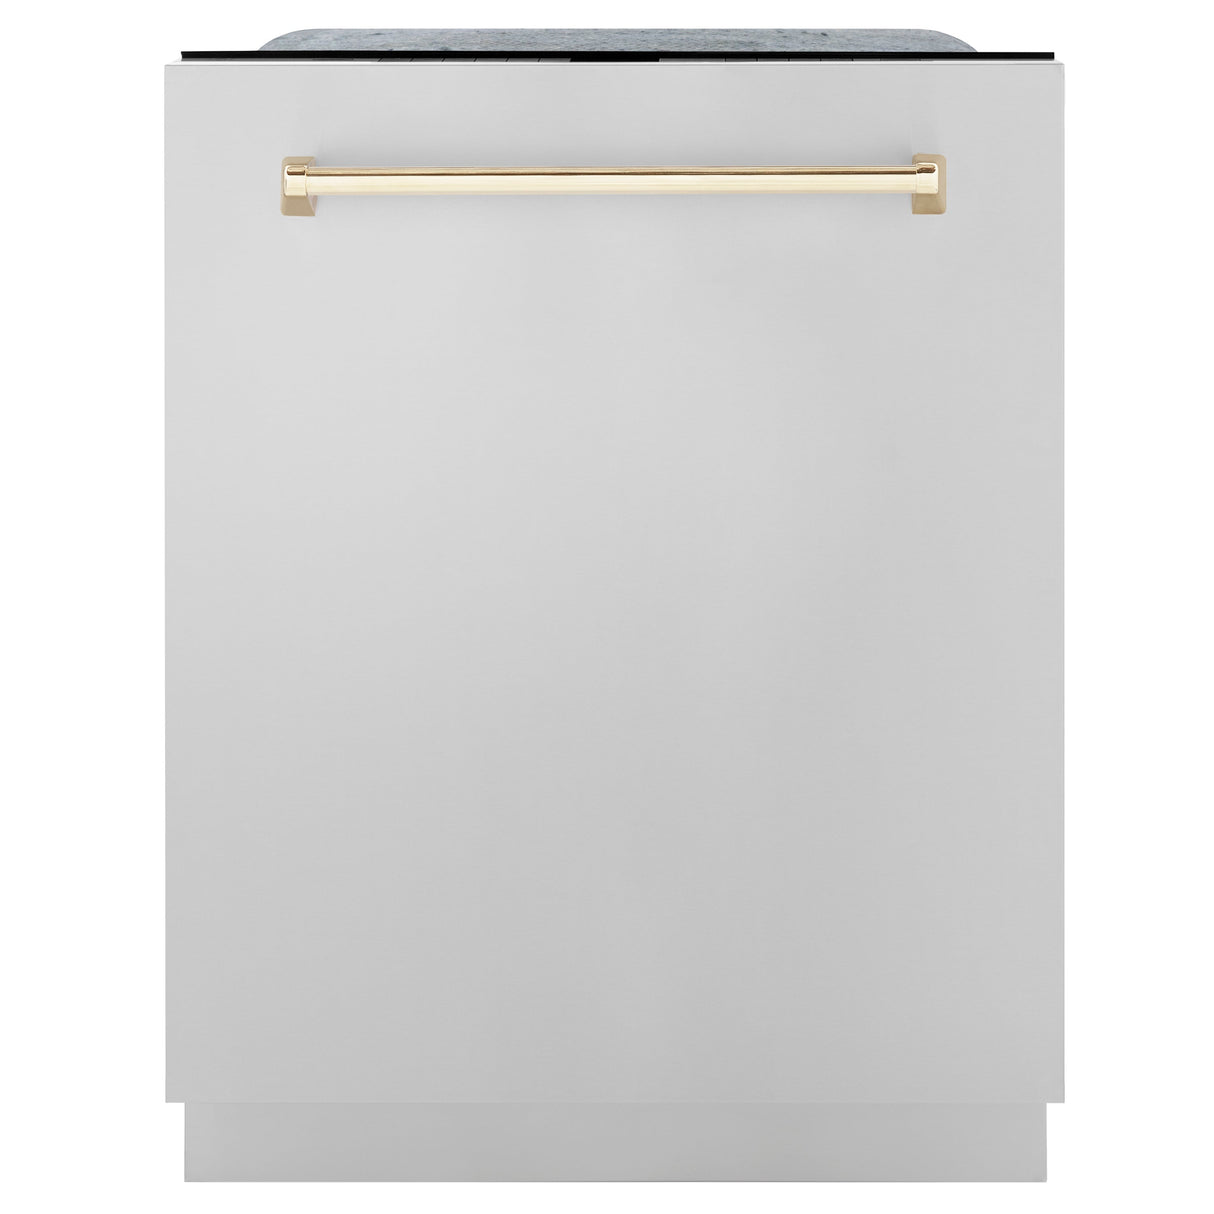 ZLINE Autograph Edition 48 in. Kitchen Package with Stainless Steel Dual Fuel Range, Range Hood and Dishwasher with Polished Gold Accents (3AKP-RARHDWM48-G)